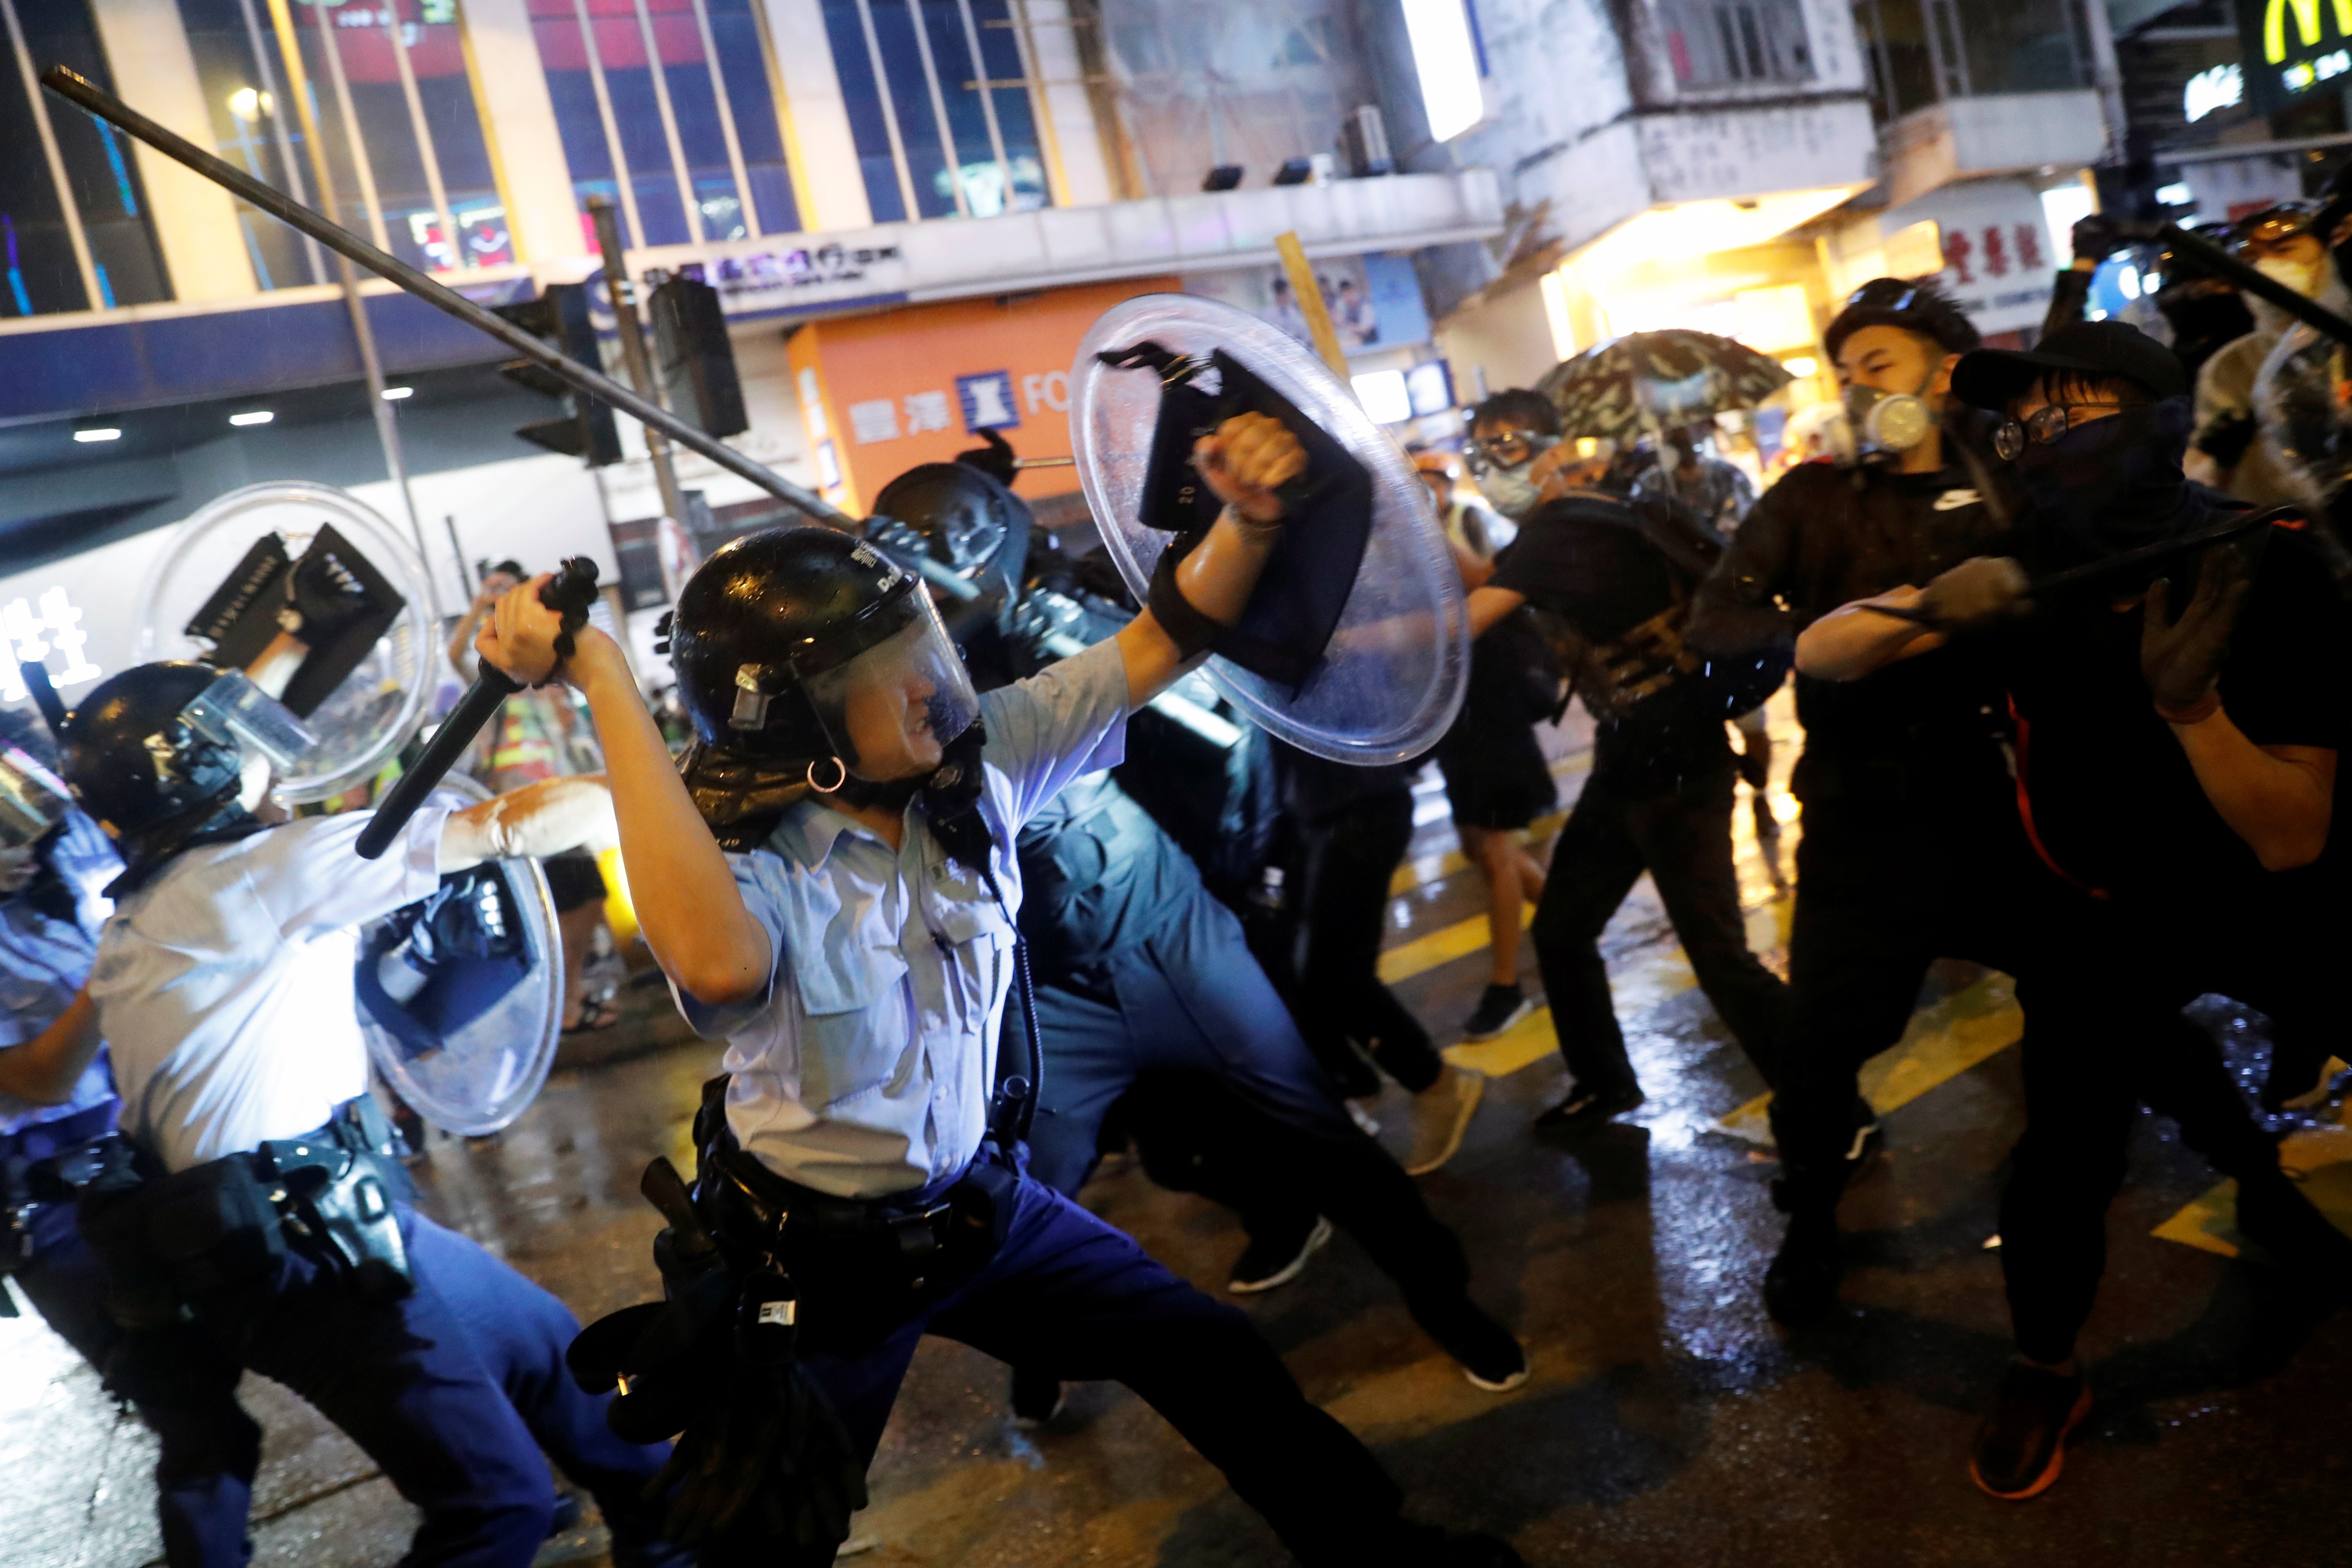 Police and protesters clash during a night of violence in Tsuen Wan, Hong Kong on Sunday night. Photo: Reuters